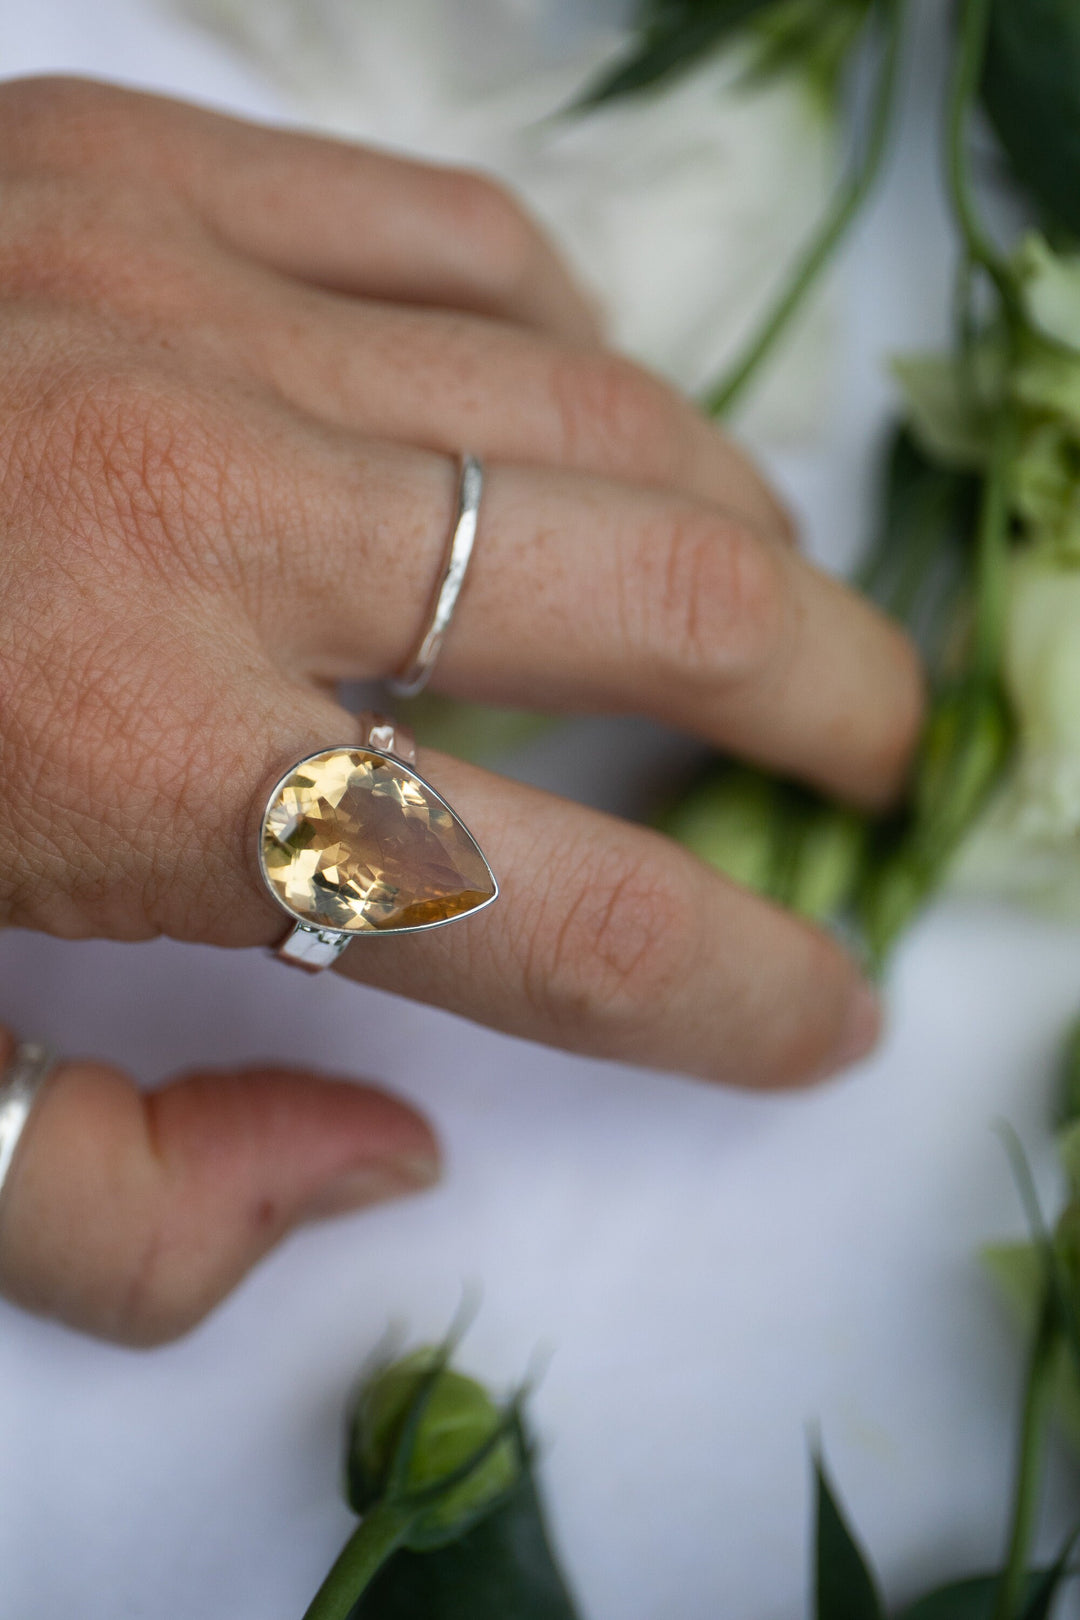 Faceted Natural Citrine Ring set in Sterling Silver - Multiple Sizes